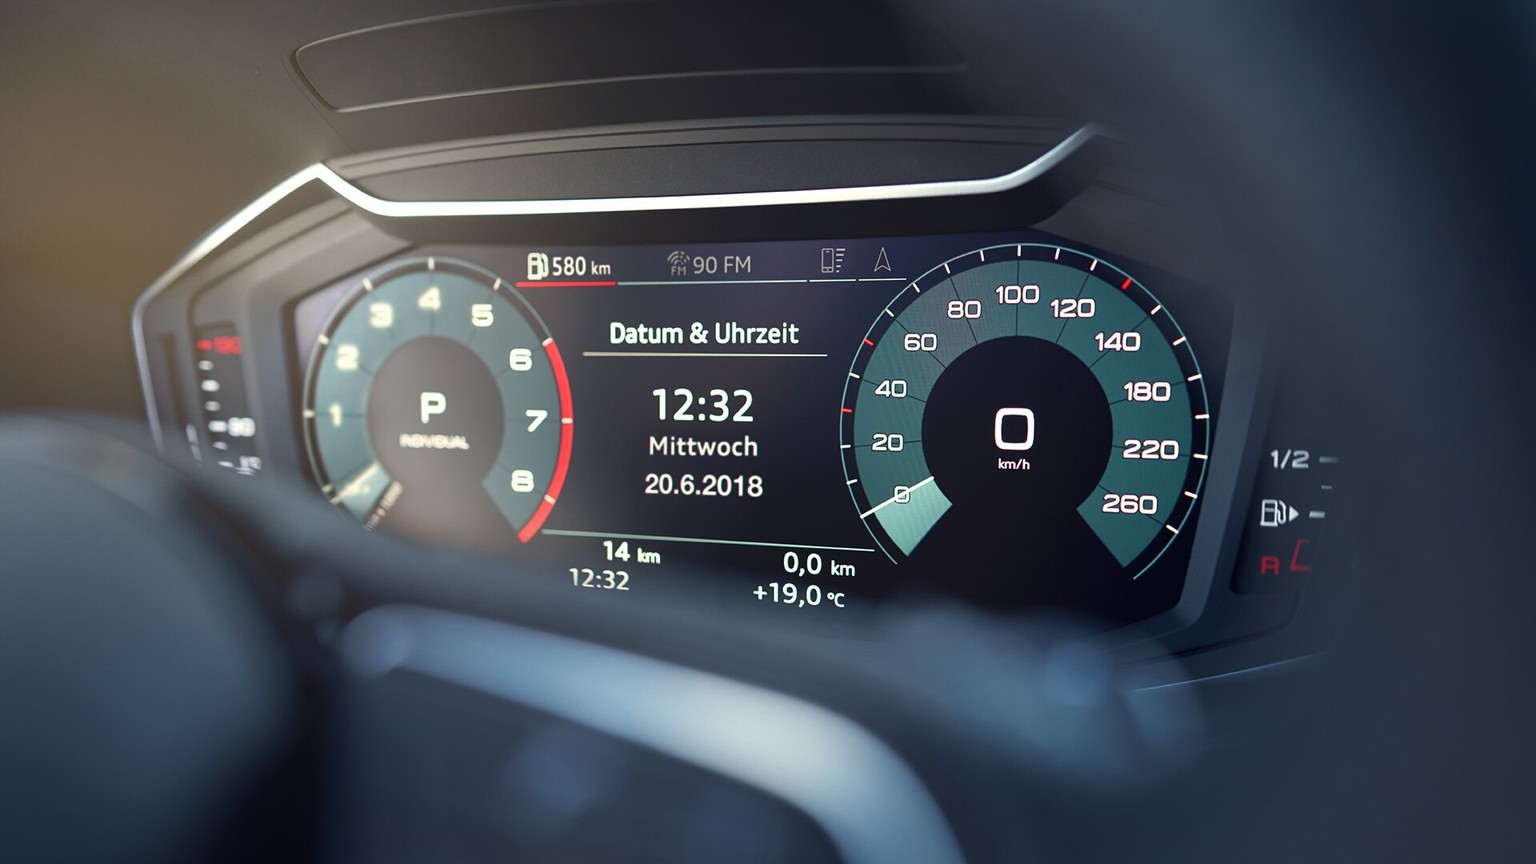 The available Audi virtual cockpit delivers an enhanced digital experience. The range of on-demand display functions include navigation maps and driver assistance systems in the driver’s field of vision.